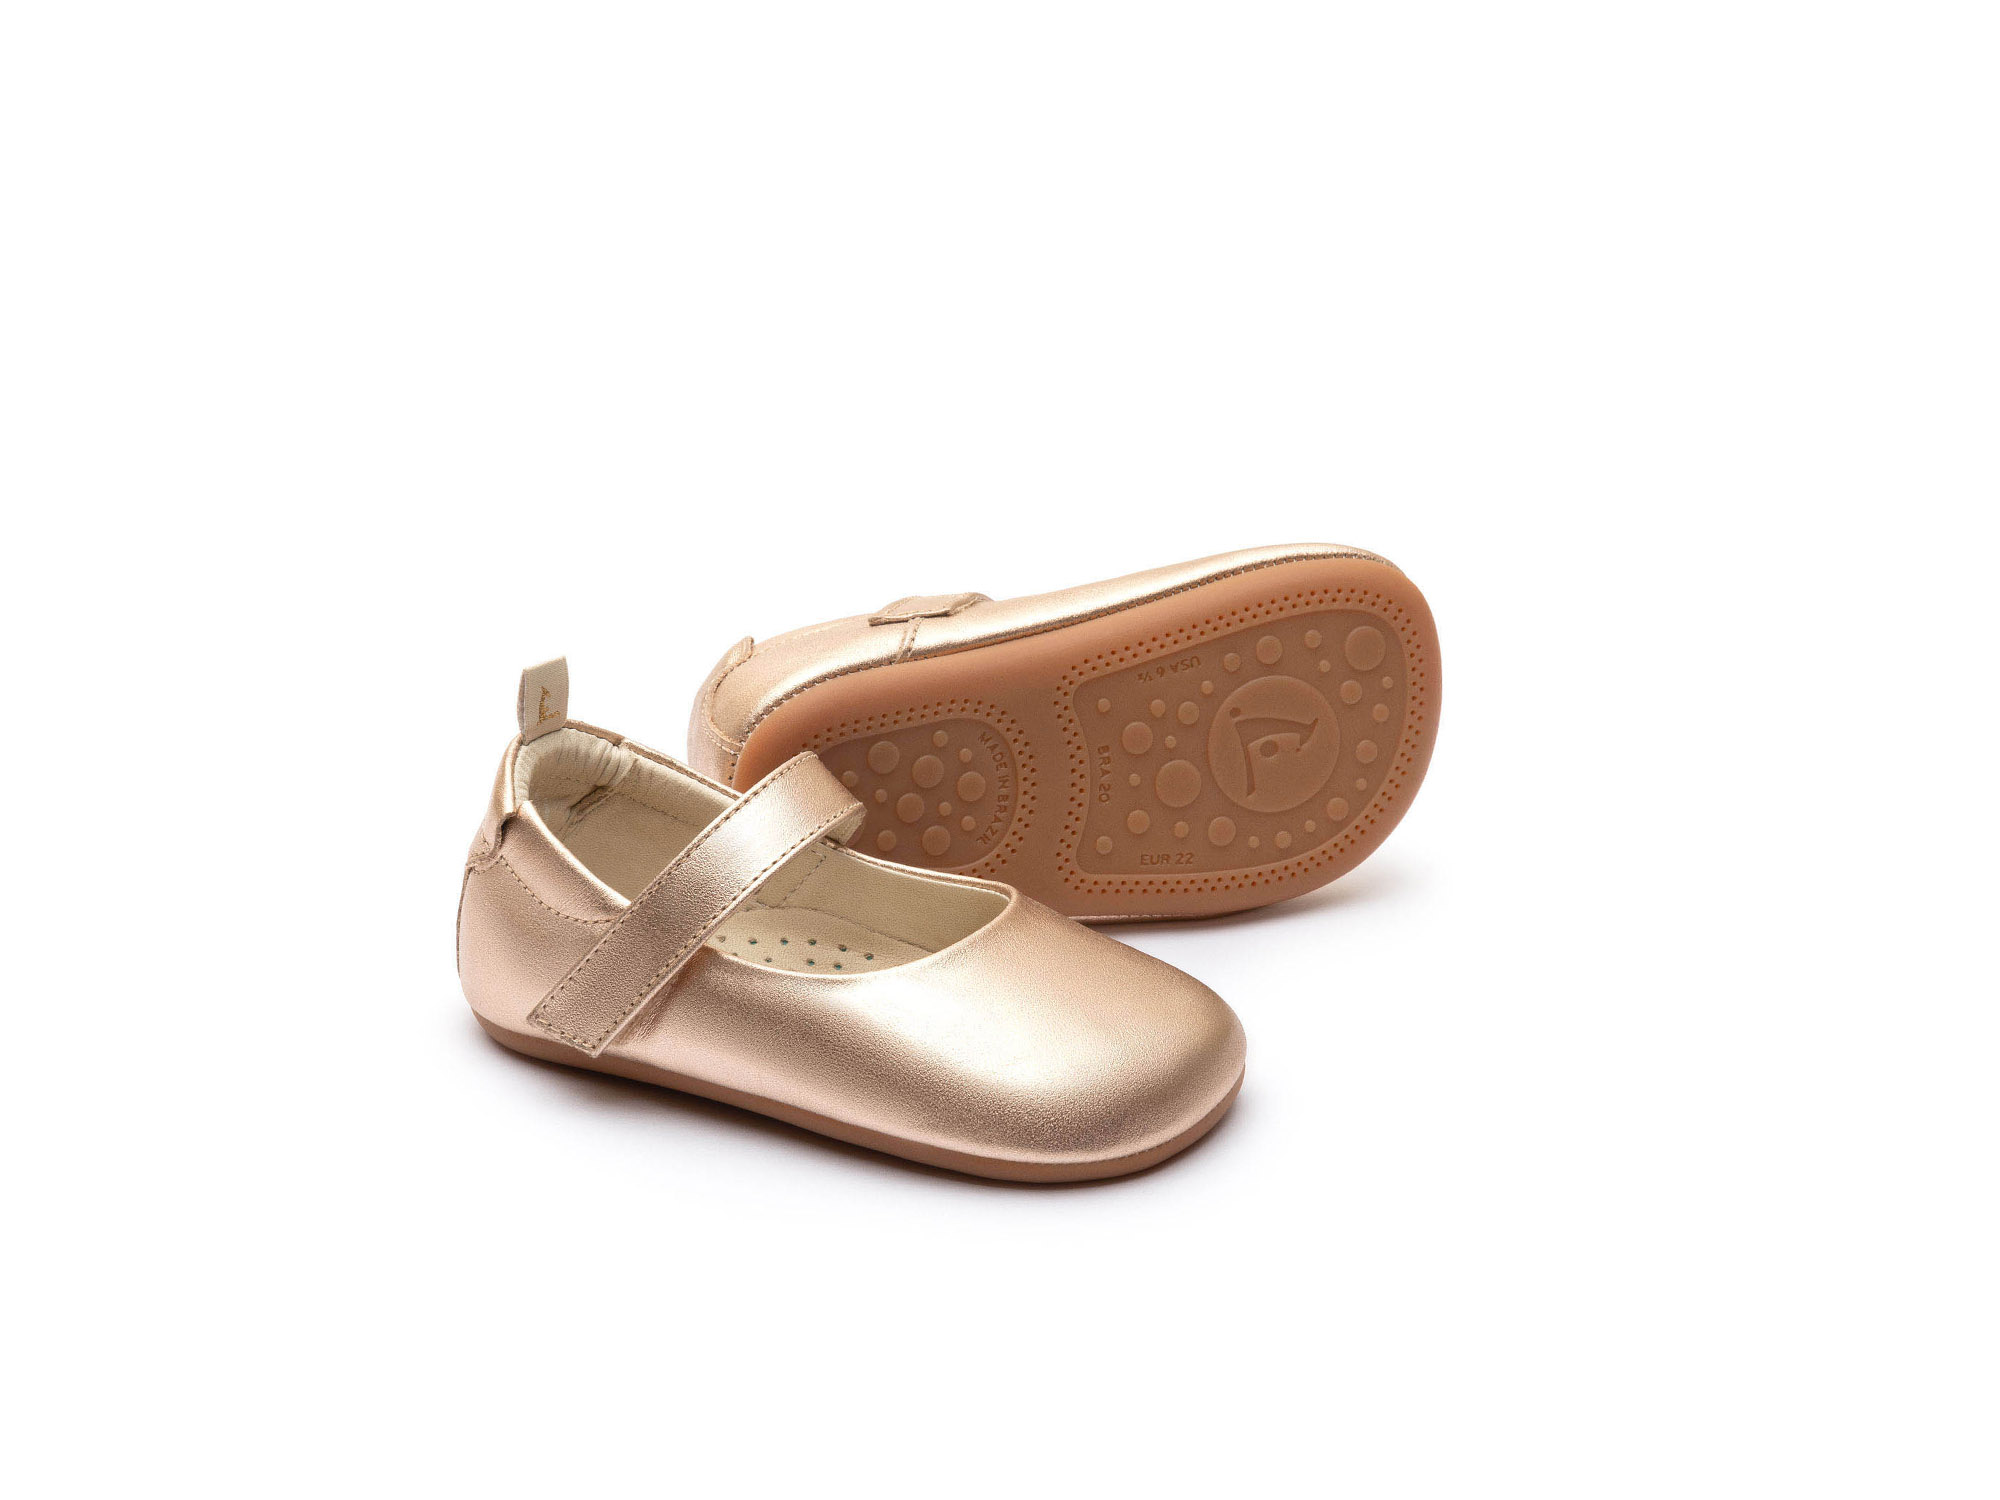 UP & GO Mary Janes for Girls Dolly | Tip Toey Joey - Australia - 0